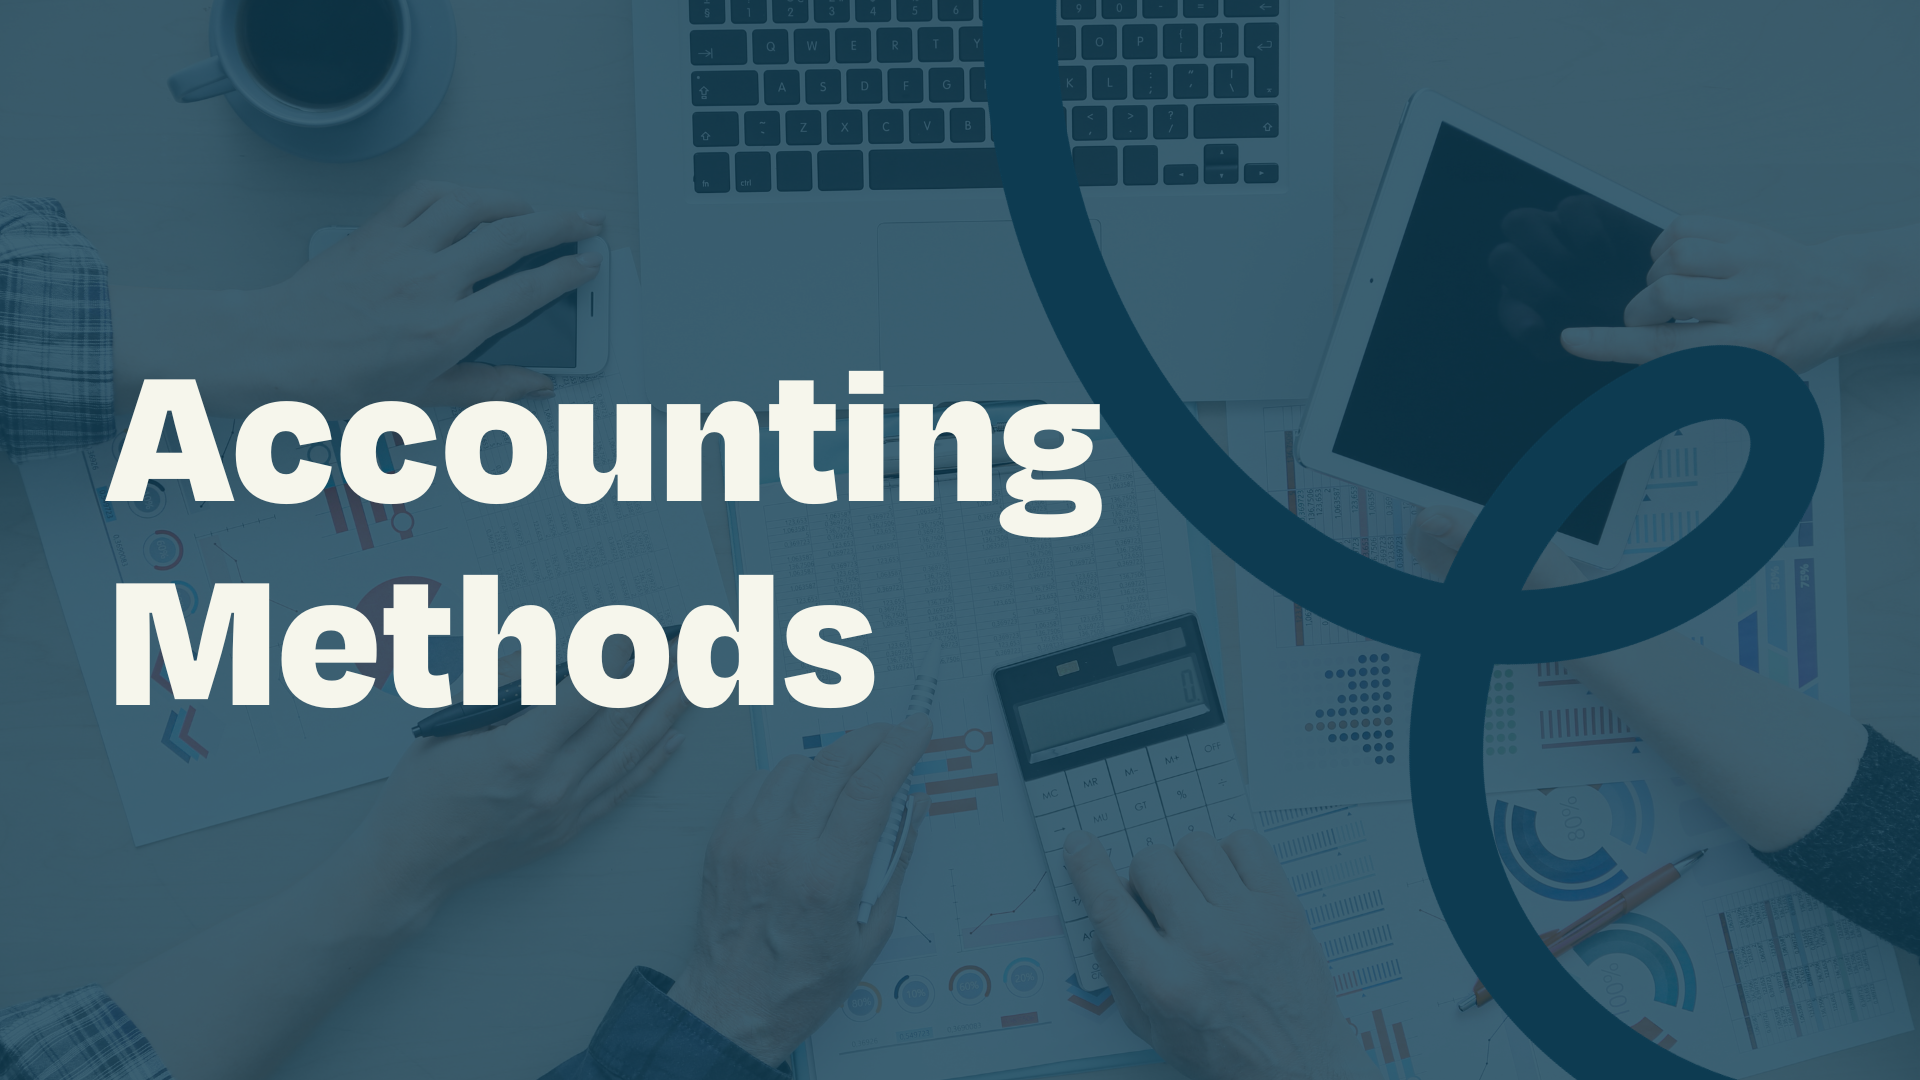 Accounting Methods | Accounting Prose